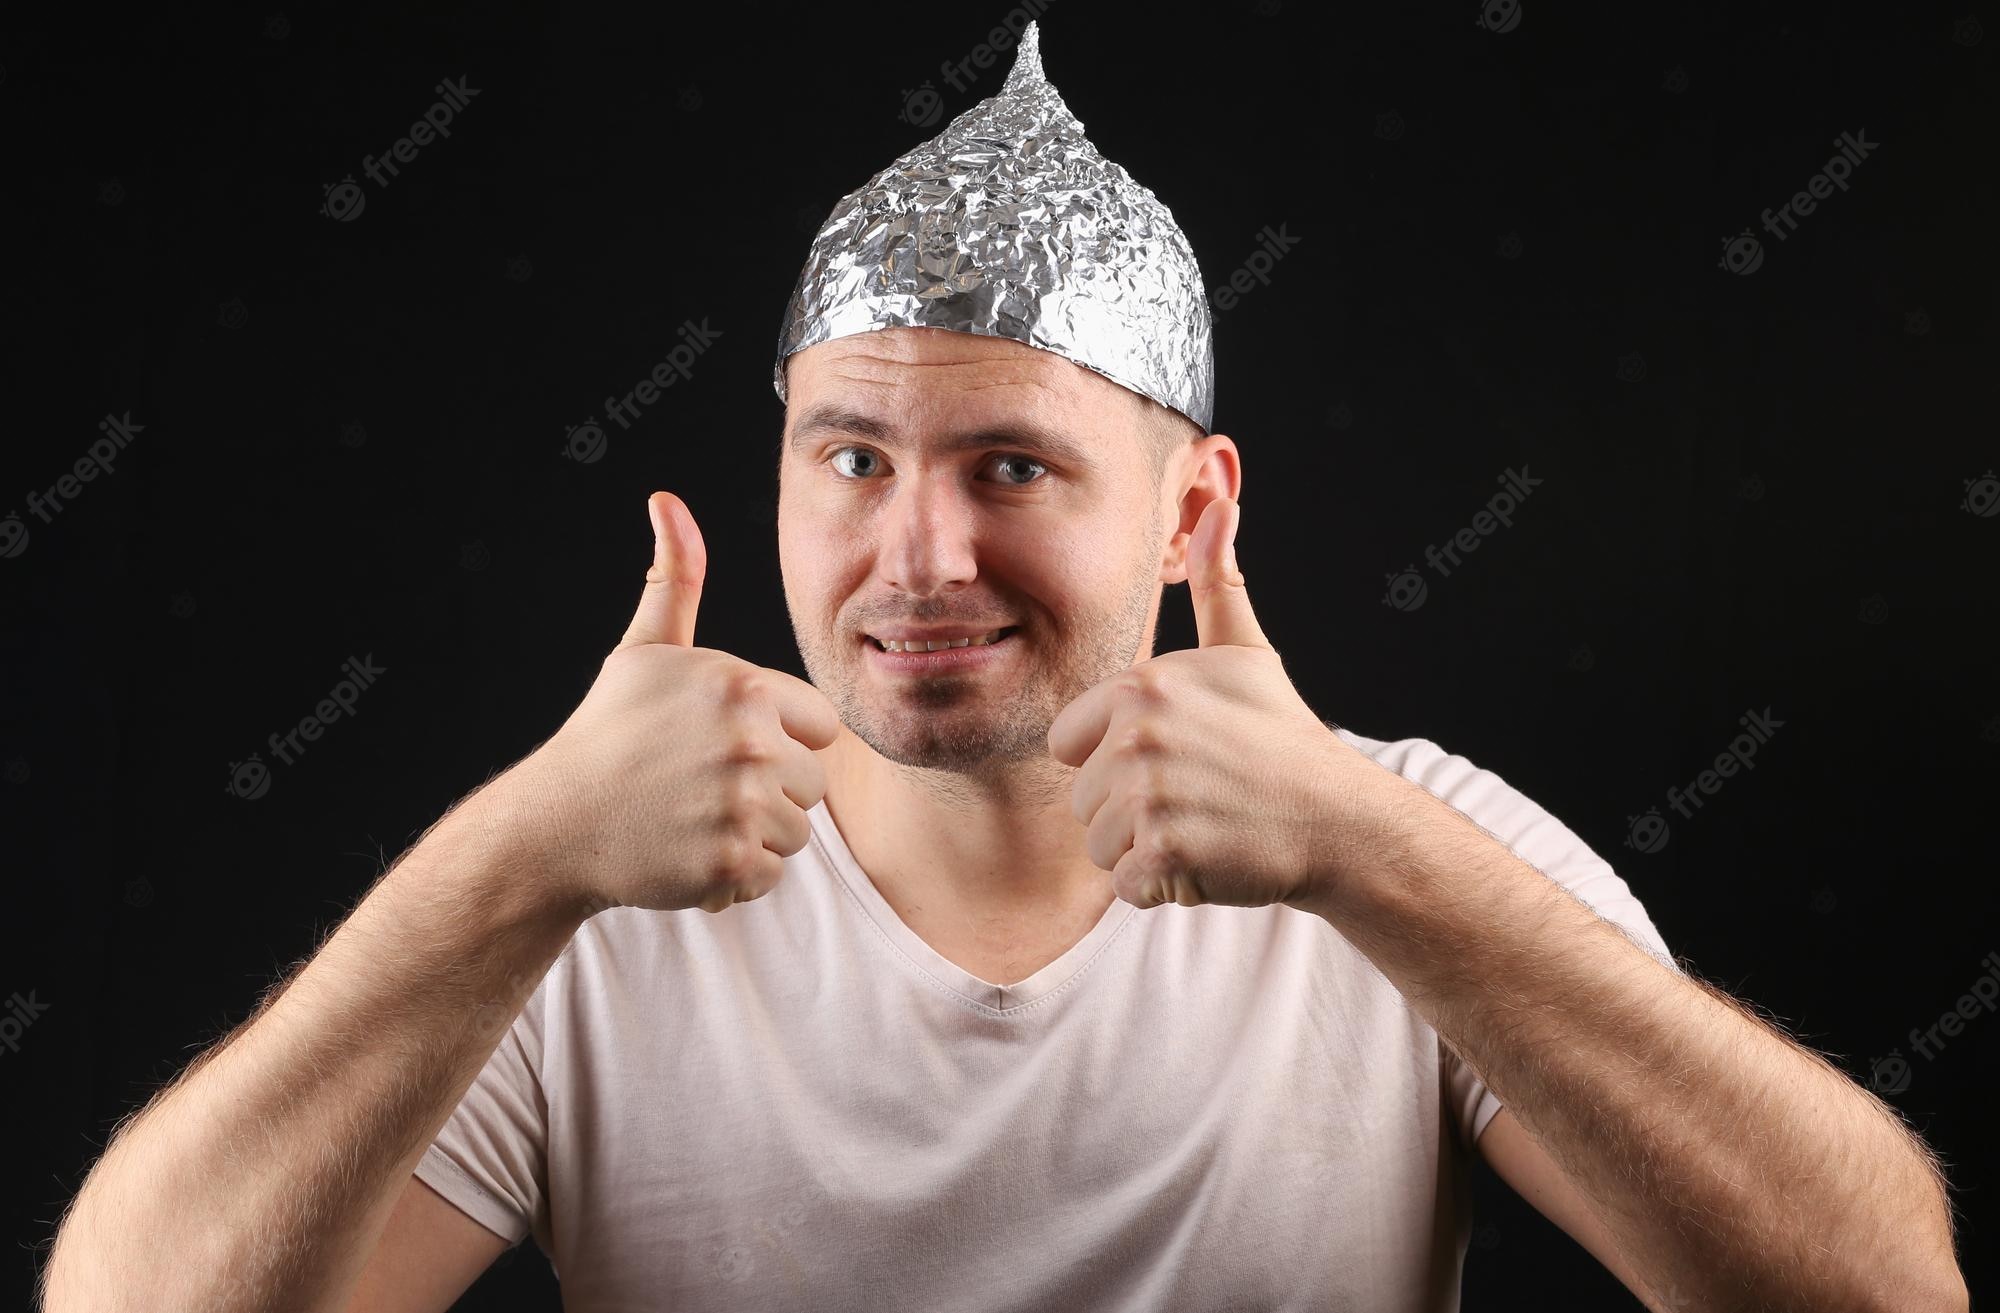 cheerful-bearded-man-foil-hat-smiles-throws-his-thumbs-up-black-background_175682-30843.jpg